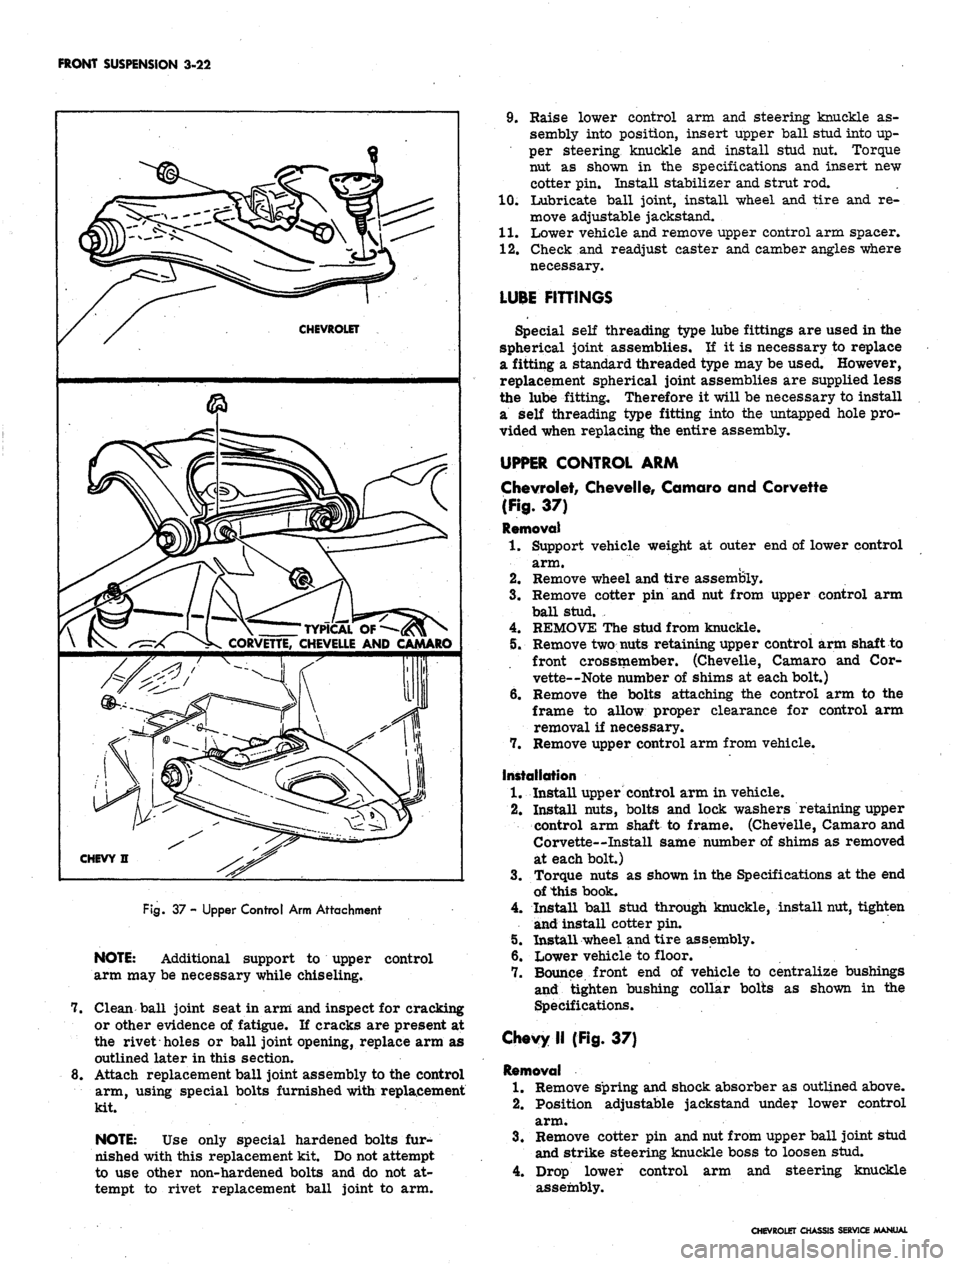 CHEVROLET CAMARO 1967 1.G Chassis Owners Manual 
FRONT SUSPENSION
 3-22

CHEVROLET

s-L 1 \
 TYPICAL
 OF

-^-x ^K CORVETTE, CHEVELLE AND CAMARO

CHEVY n

Rg.
 37 - Upper Control Arm Attachment

NOTE:
 Additional support to upper control

arm may be